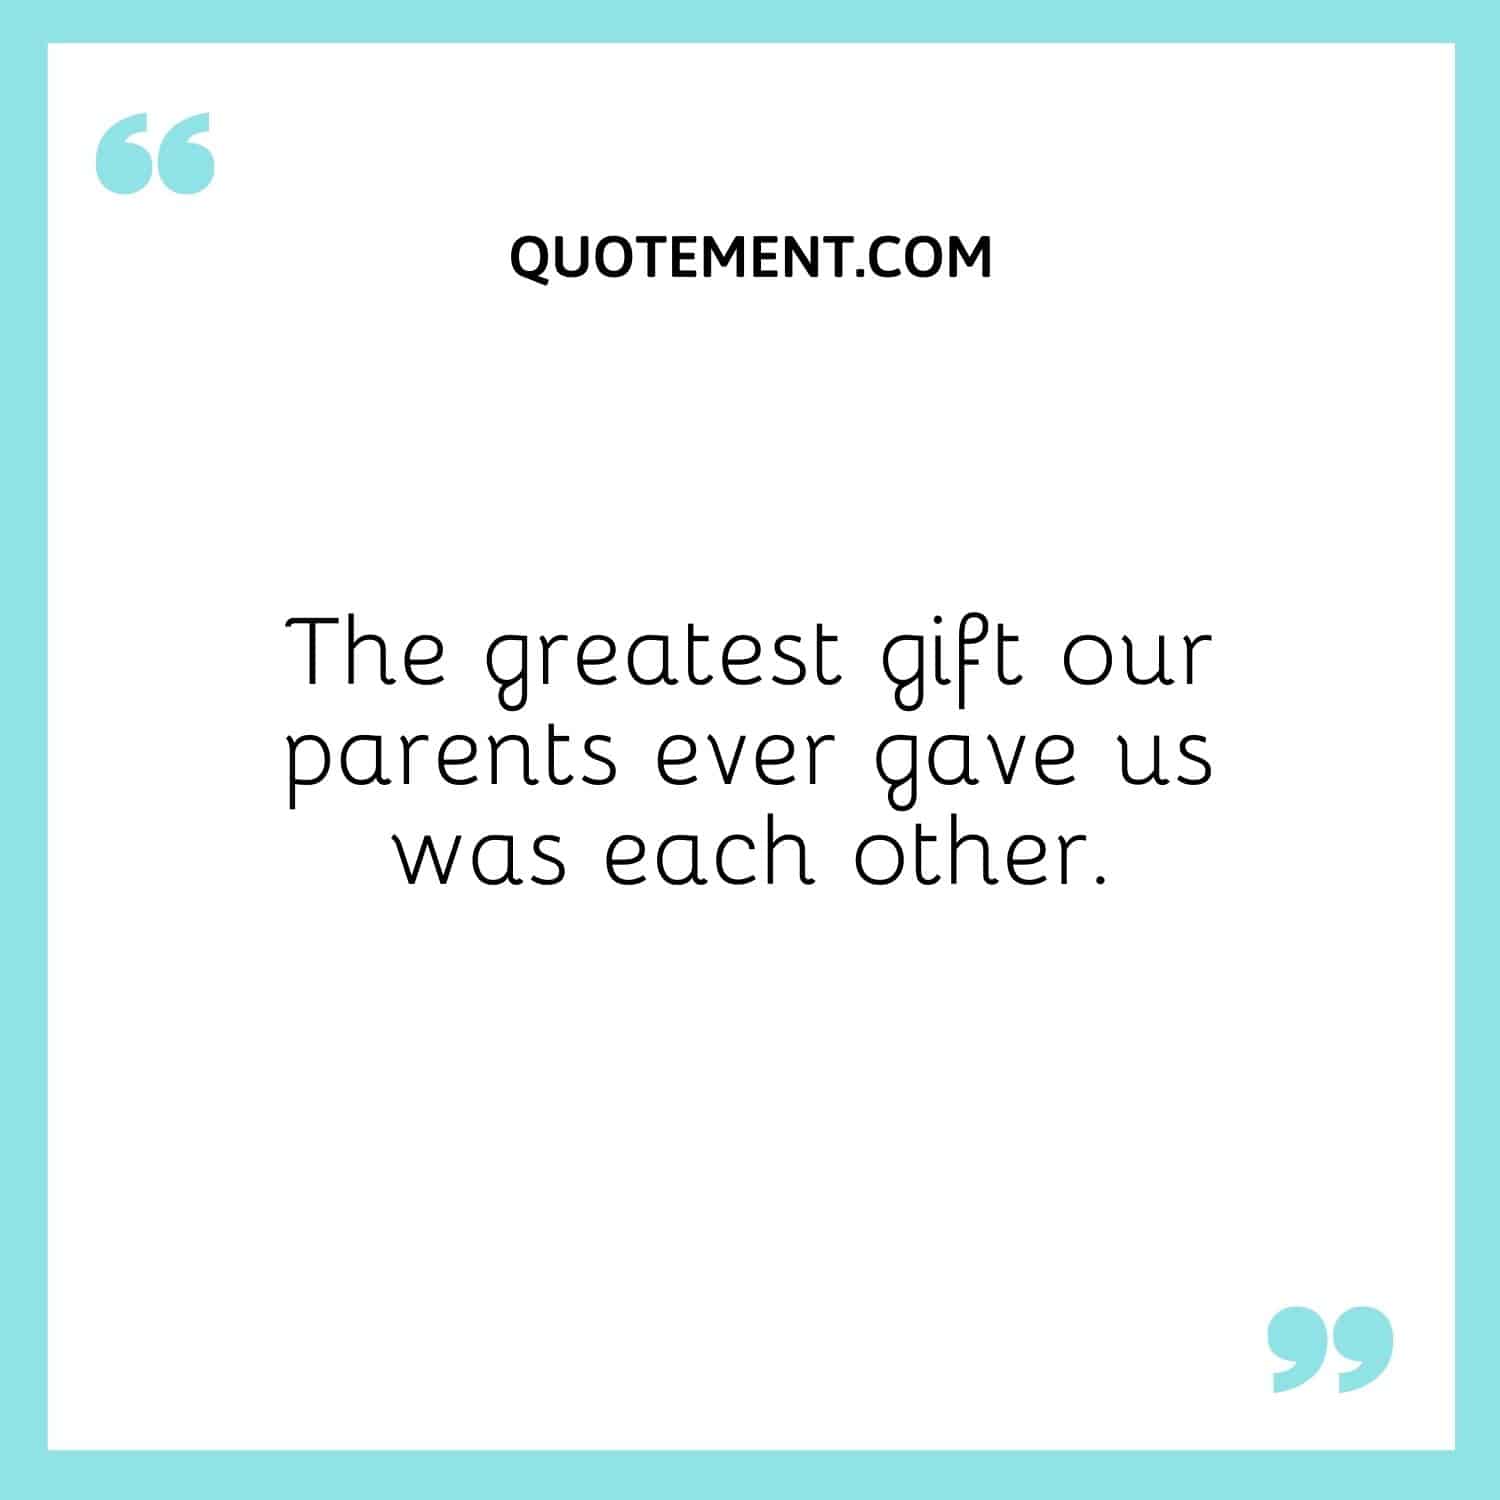 The greatest gift our parents ever gave us was each other.